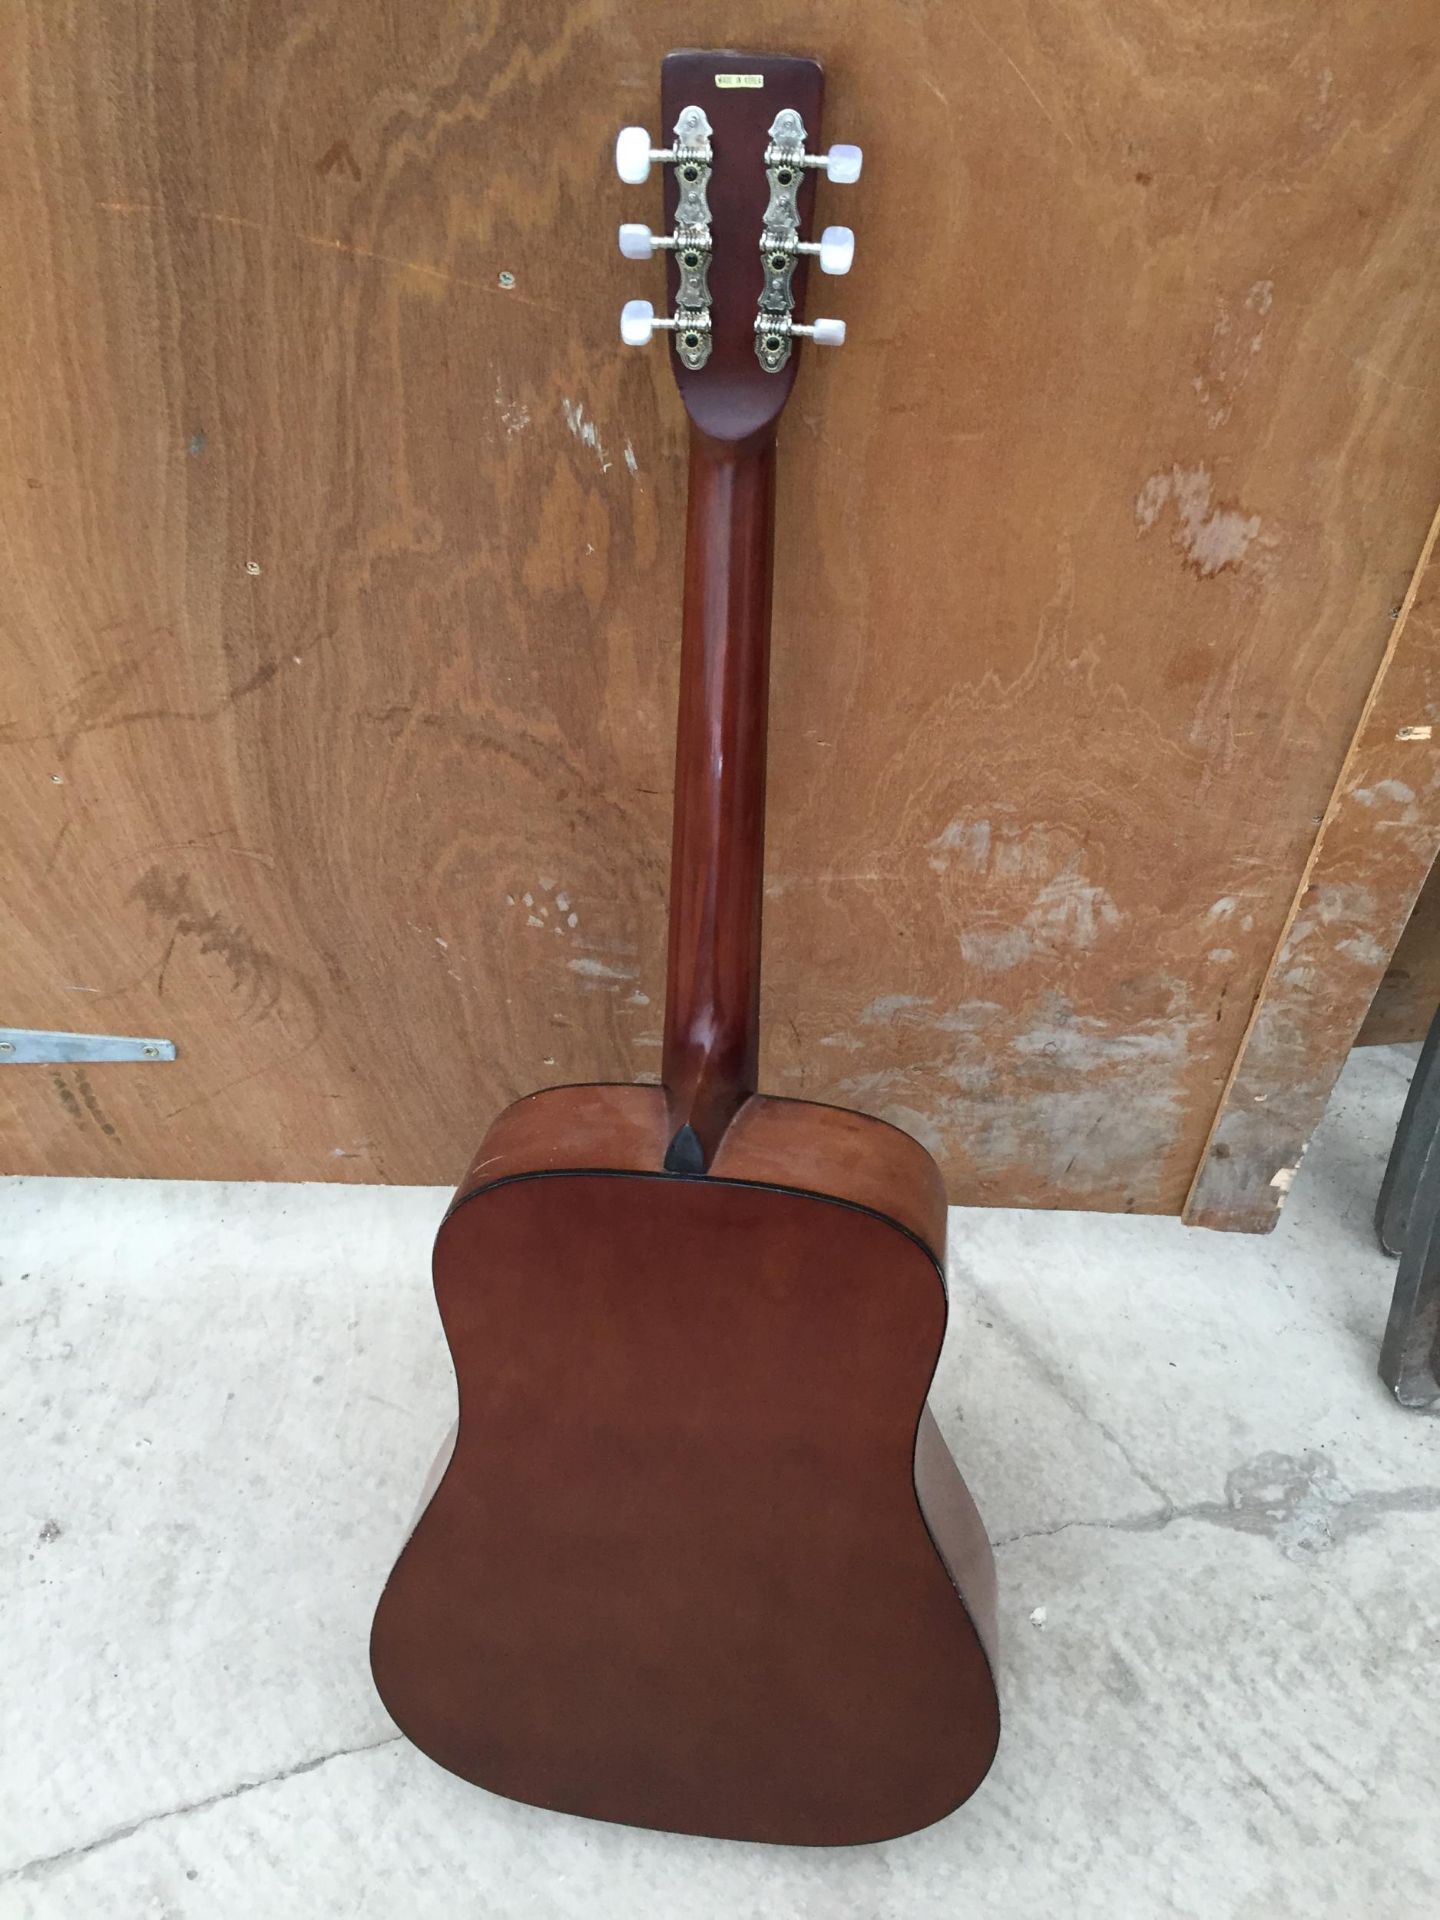 A KAY ACOUSTIC GUITAR - Image 6 of 6